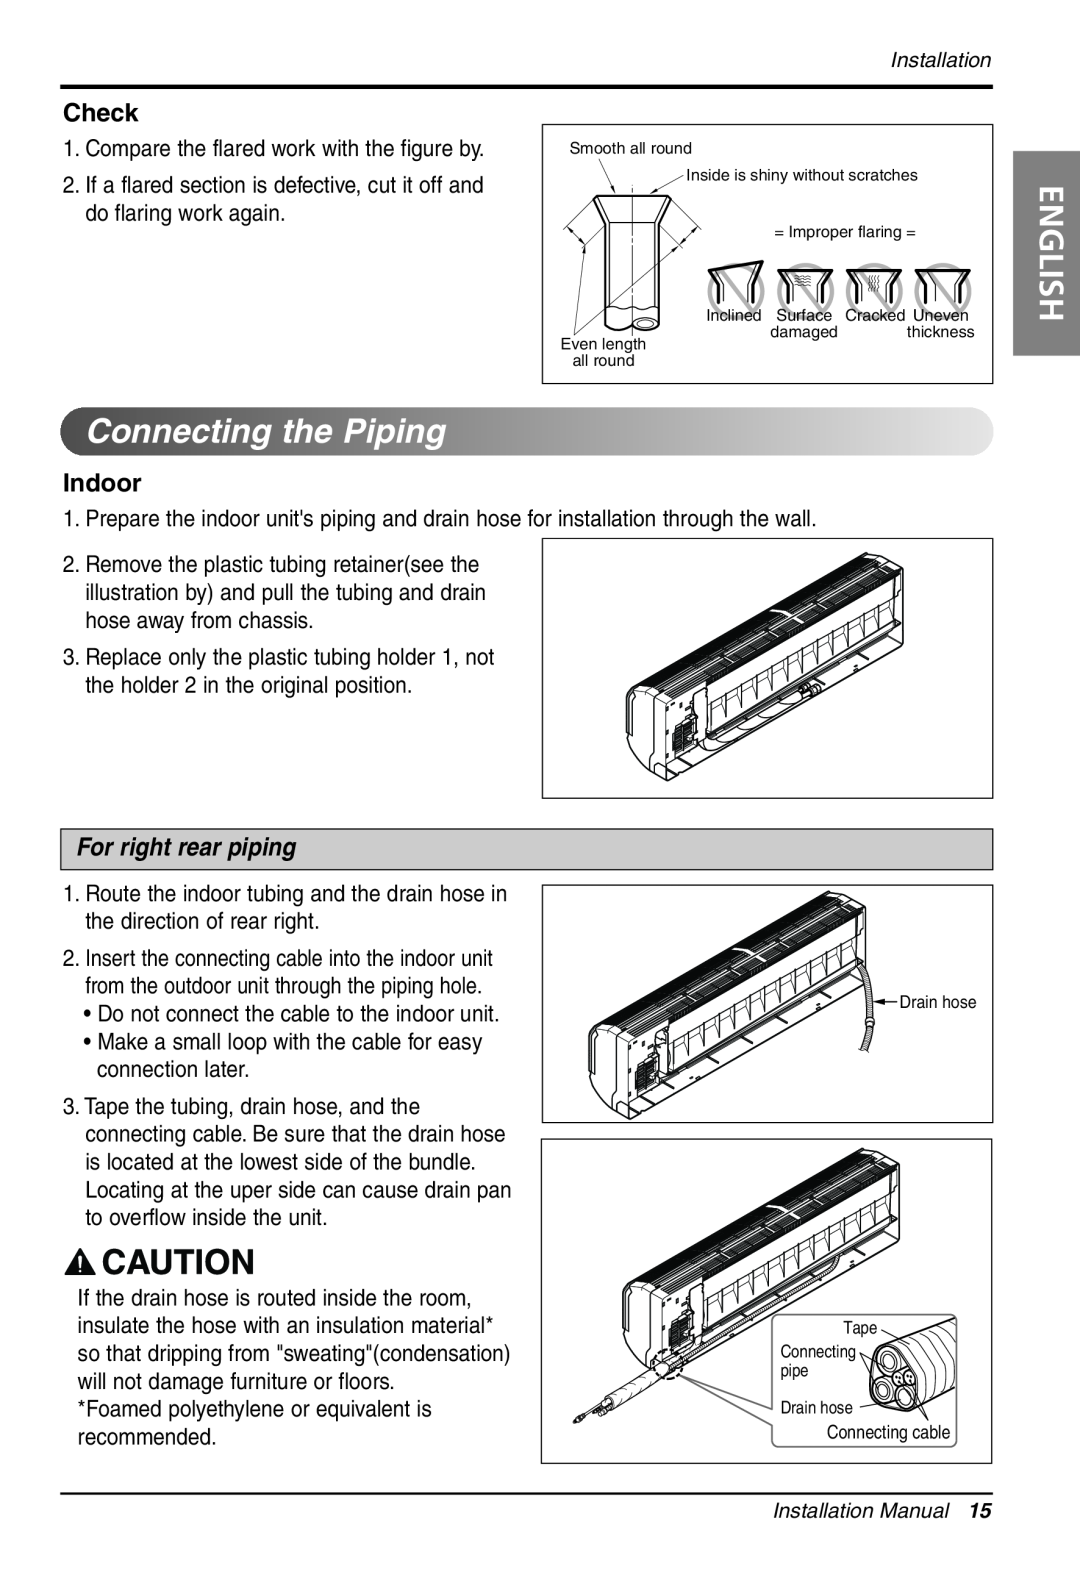 LG Electronics LS305HV installation manual ConnectingthePiping, For right rear piping, English 